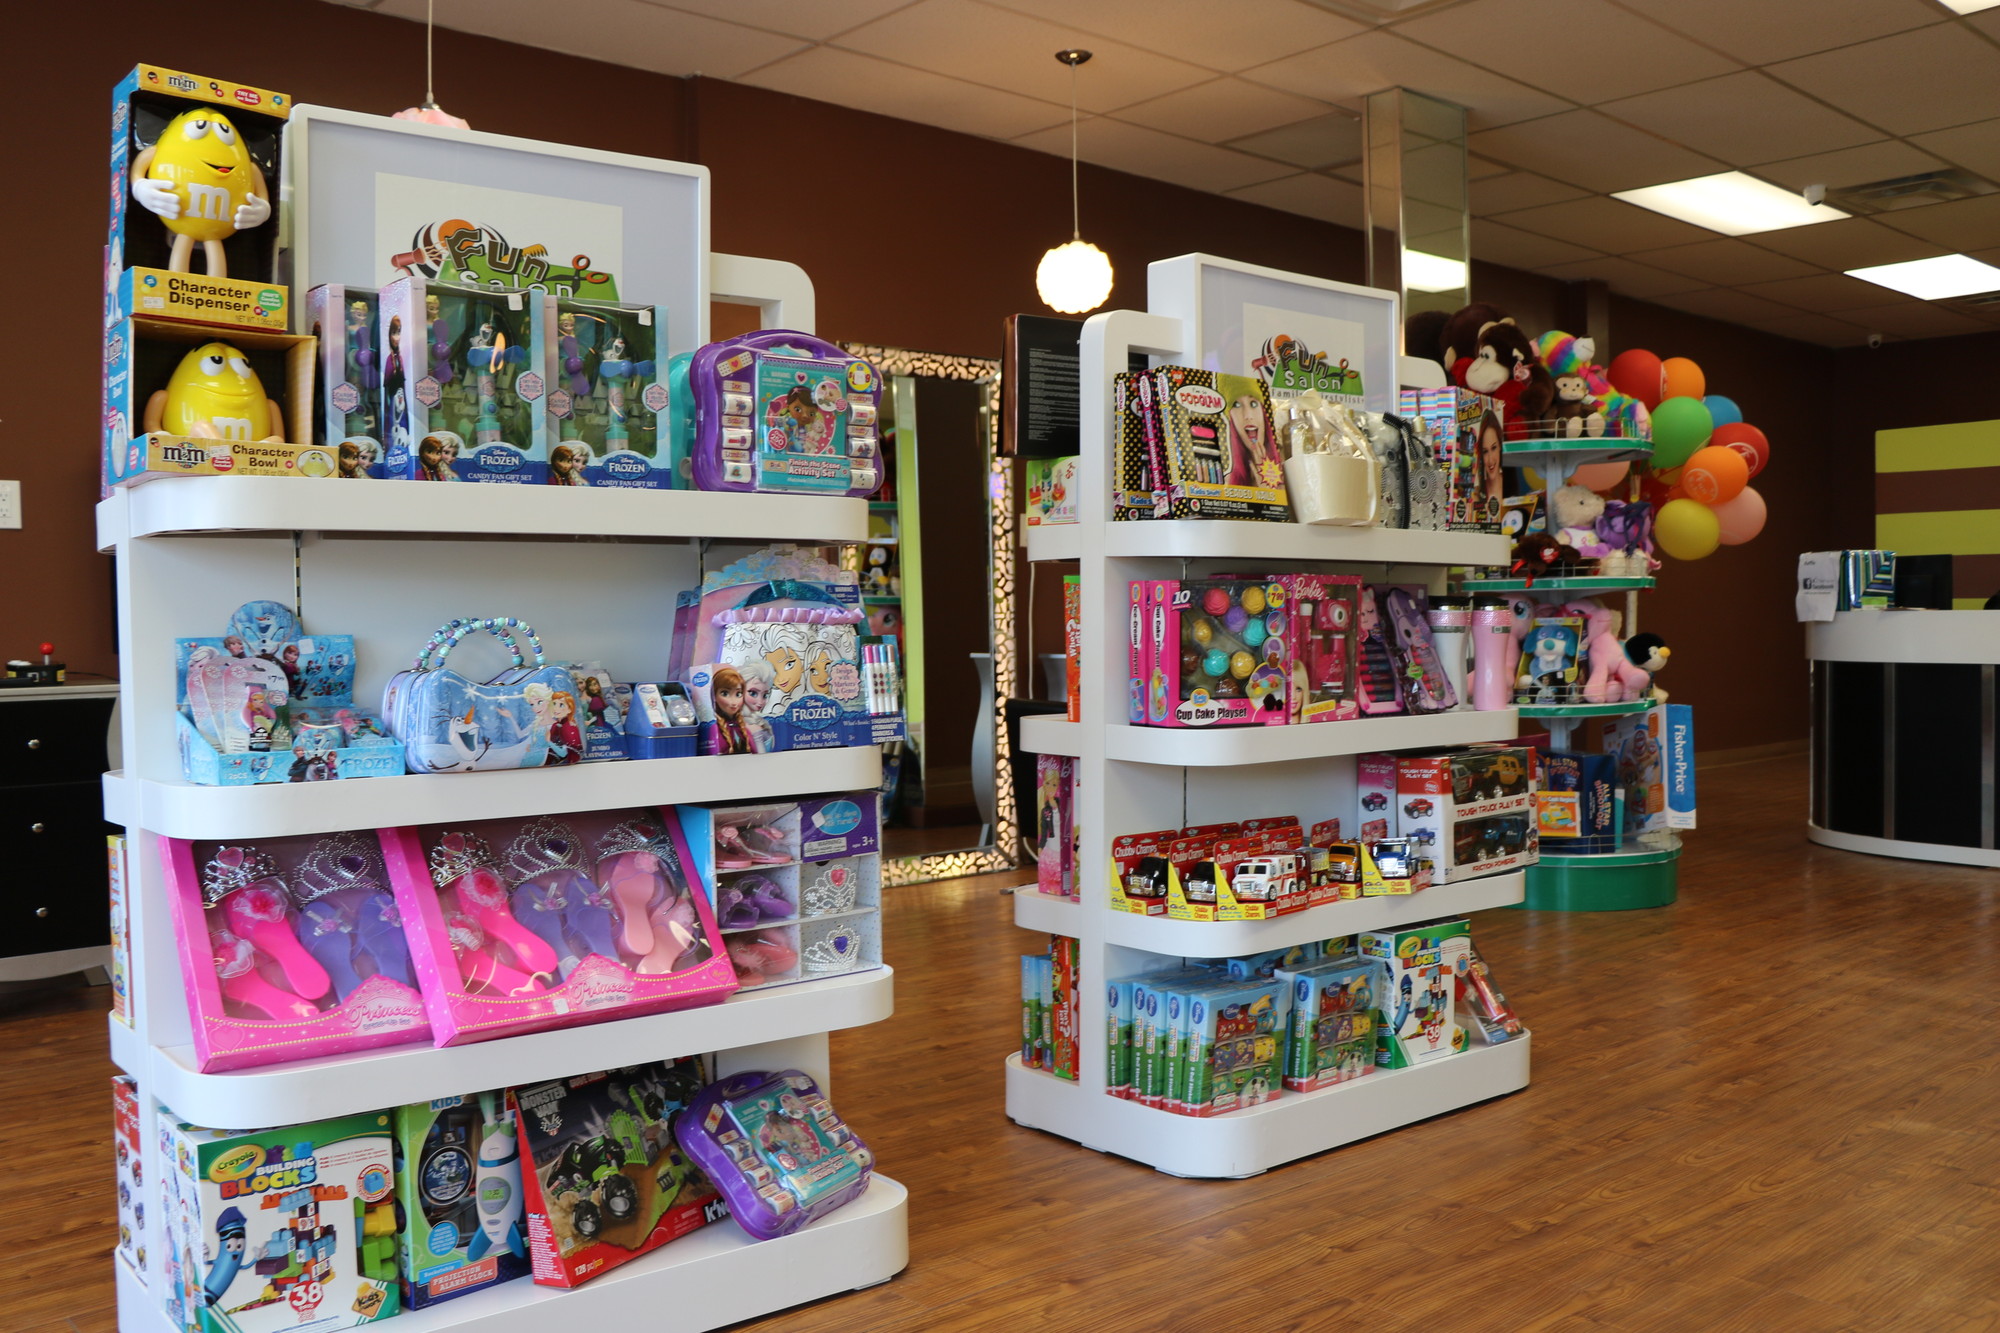 Toys fill the main floor of the salon, adding to the kiddie appeal.